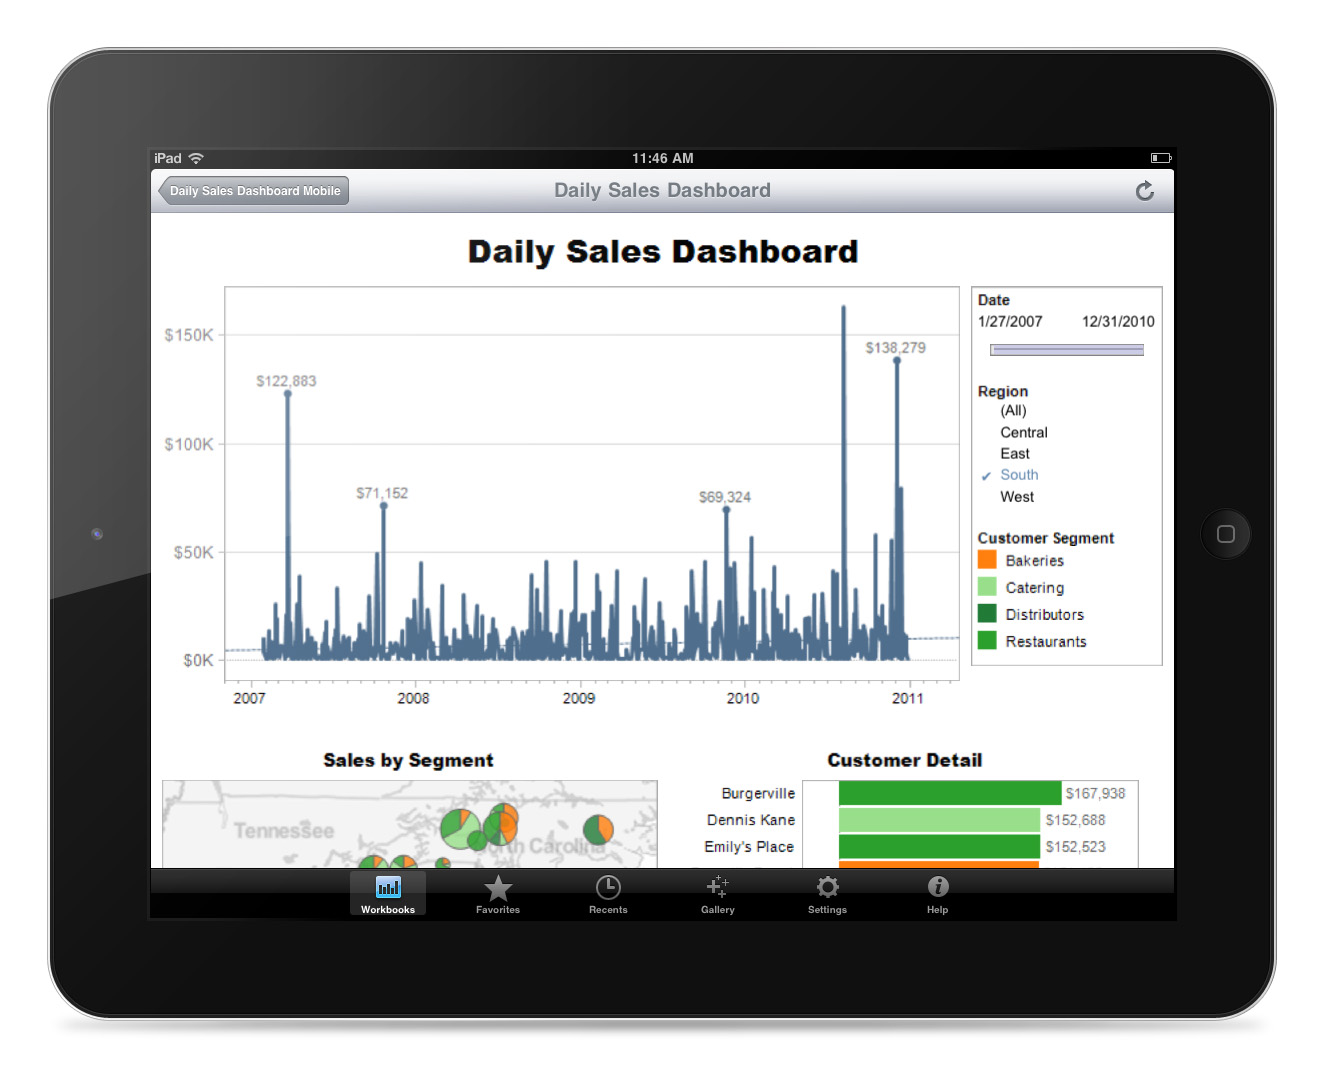 <p style="text-align: center;"><span style="font-weight: 400;">Daily sales dashboard in Tableau (</span><a href="https://www.capterra.com/p/208764/Tableau/"><span style="font-weight: 400;">Source</span></a><span style="font-weight: 400;">)</span></p>
